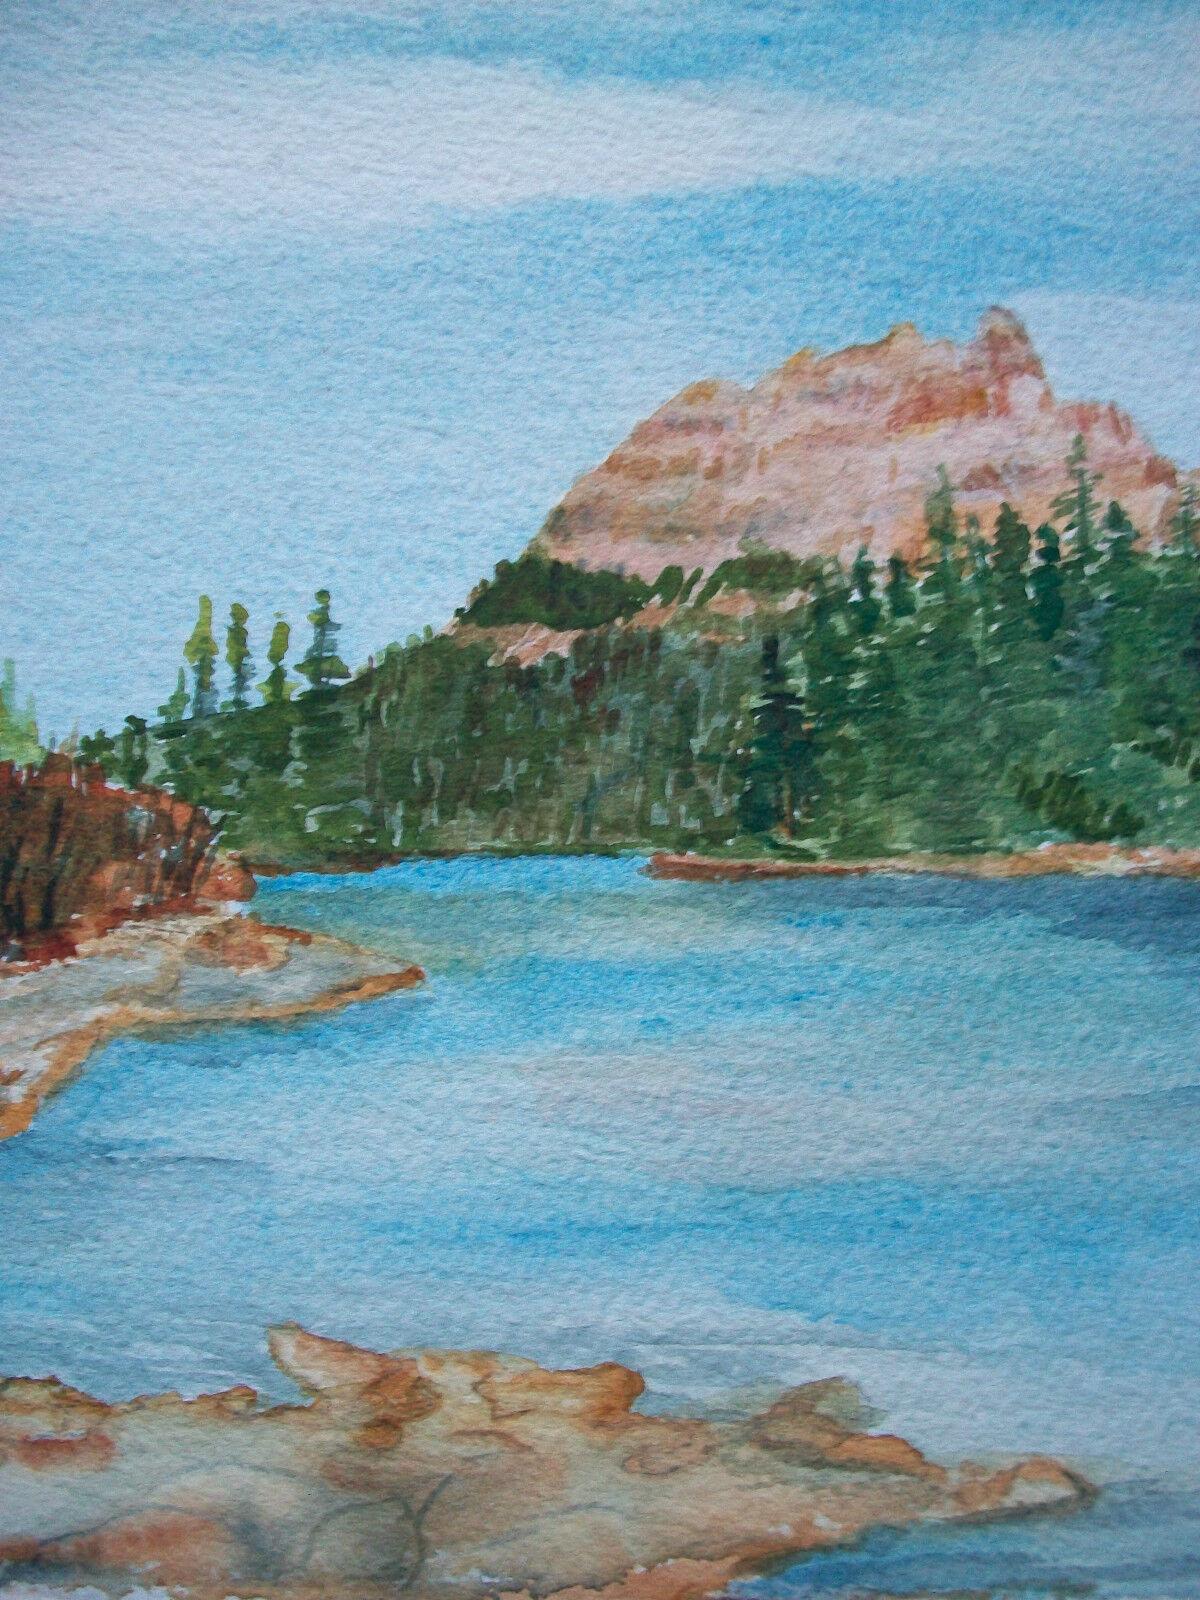 VELLA STRAND - 'Castle Mountain and Bow River - Alberta' - Contemporary watercolor painting on watercolor paper - signed lower right - unframed - Canada - circa 2000.

Excellent condition - no loss - no damage - no restoration - bright and strong